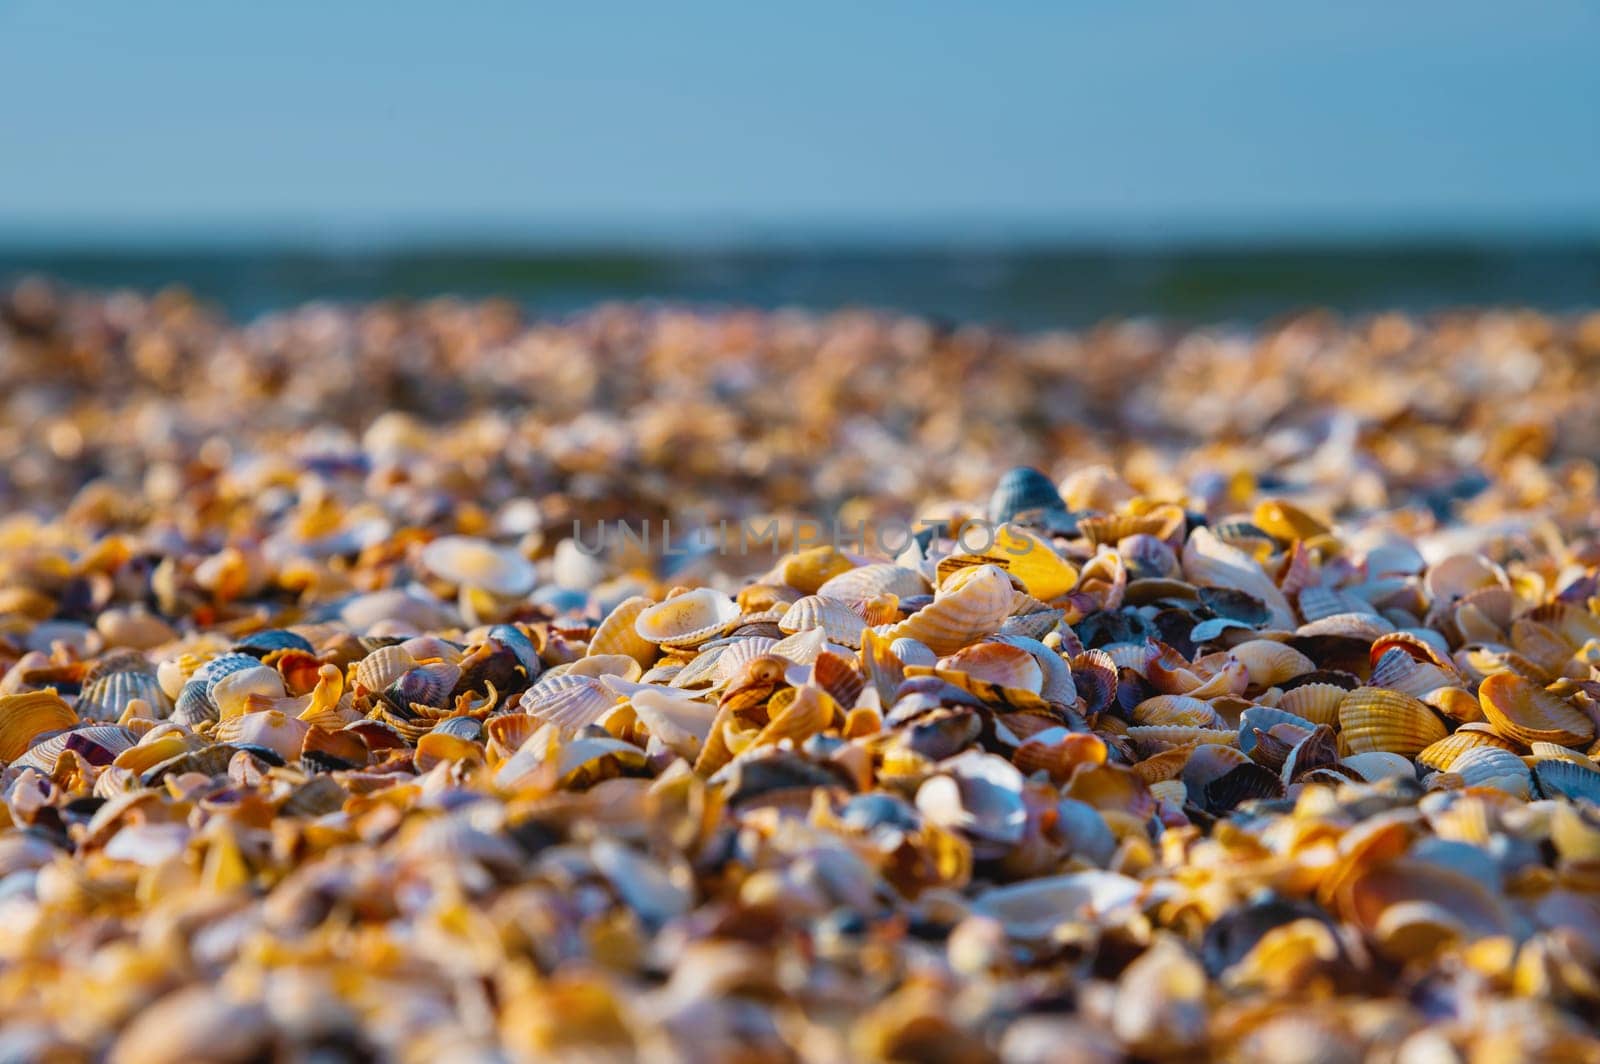 close-up background of seashells on the morning shore. Beach background with small shell, colorful sand, background blurred by yanik88